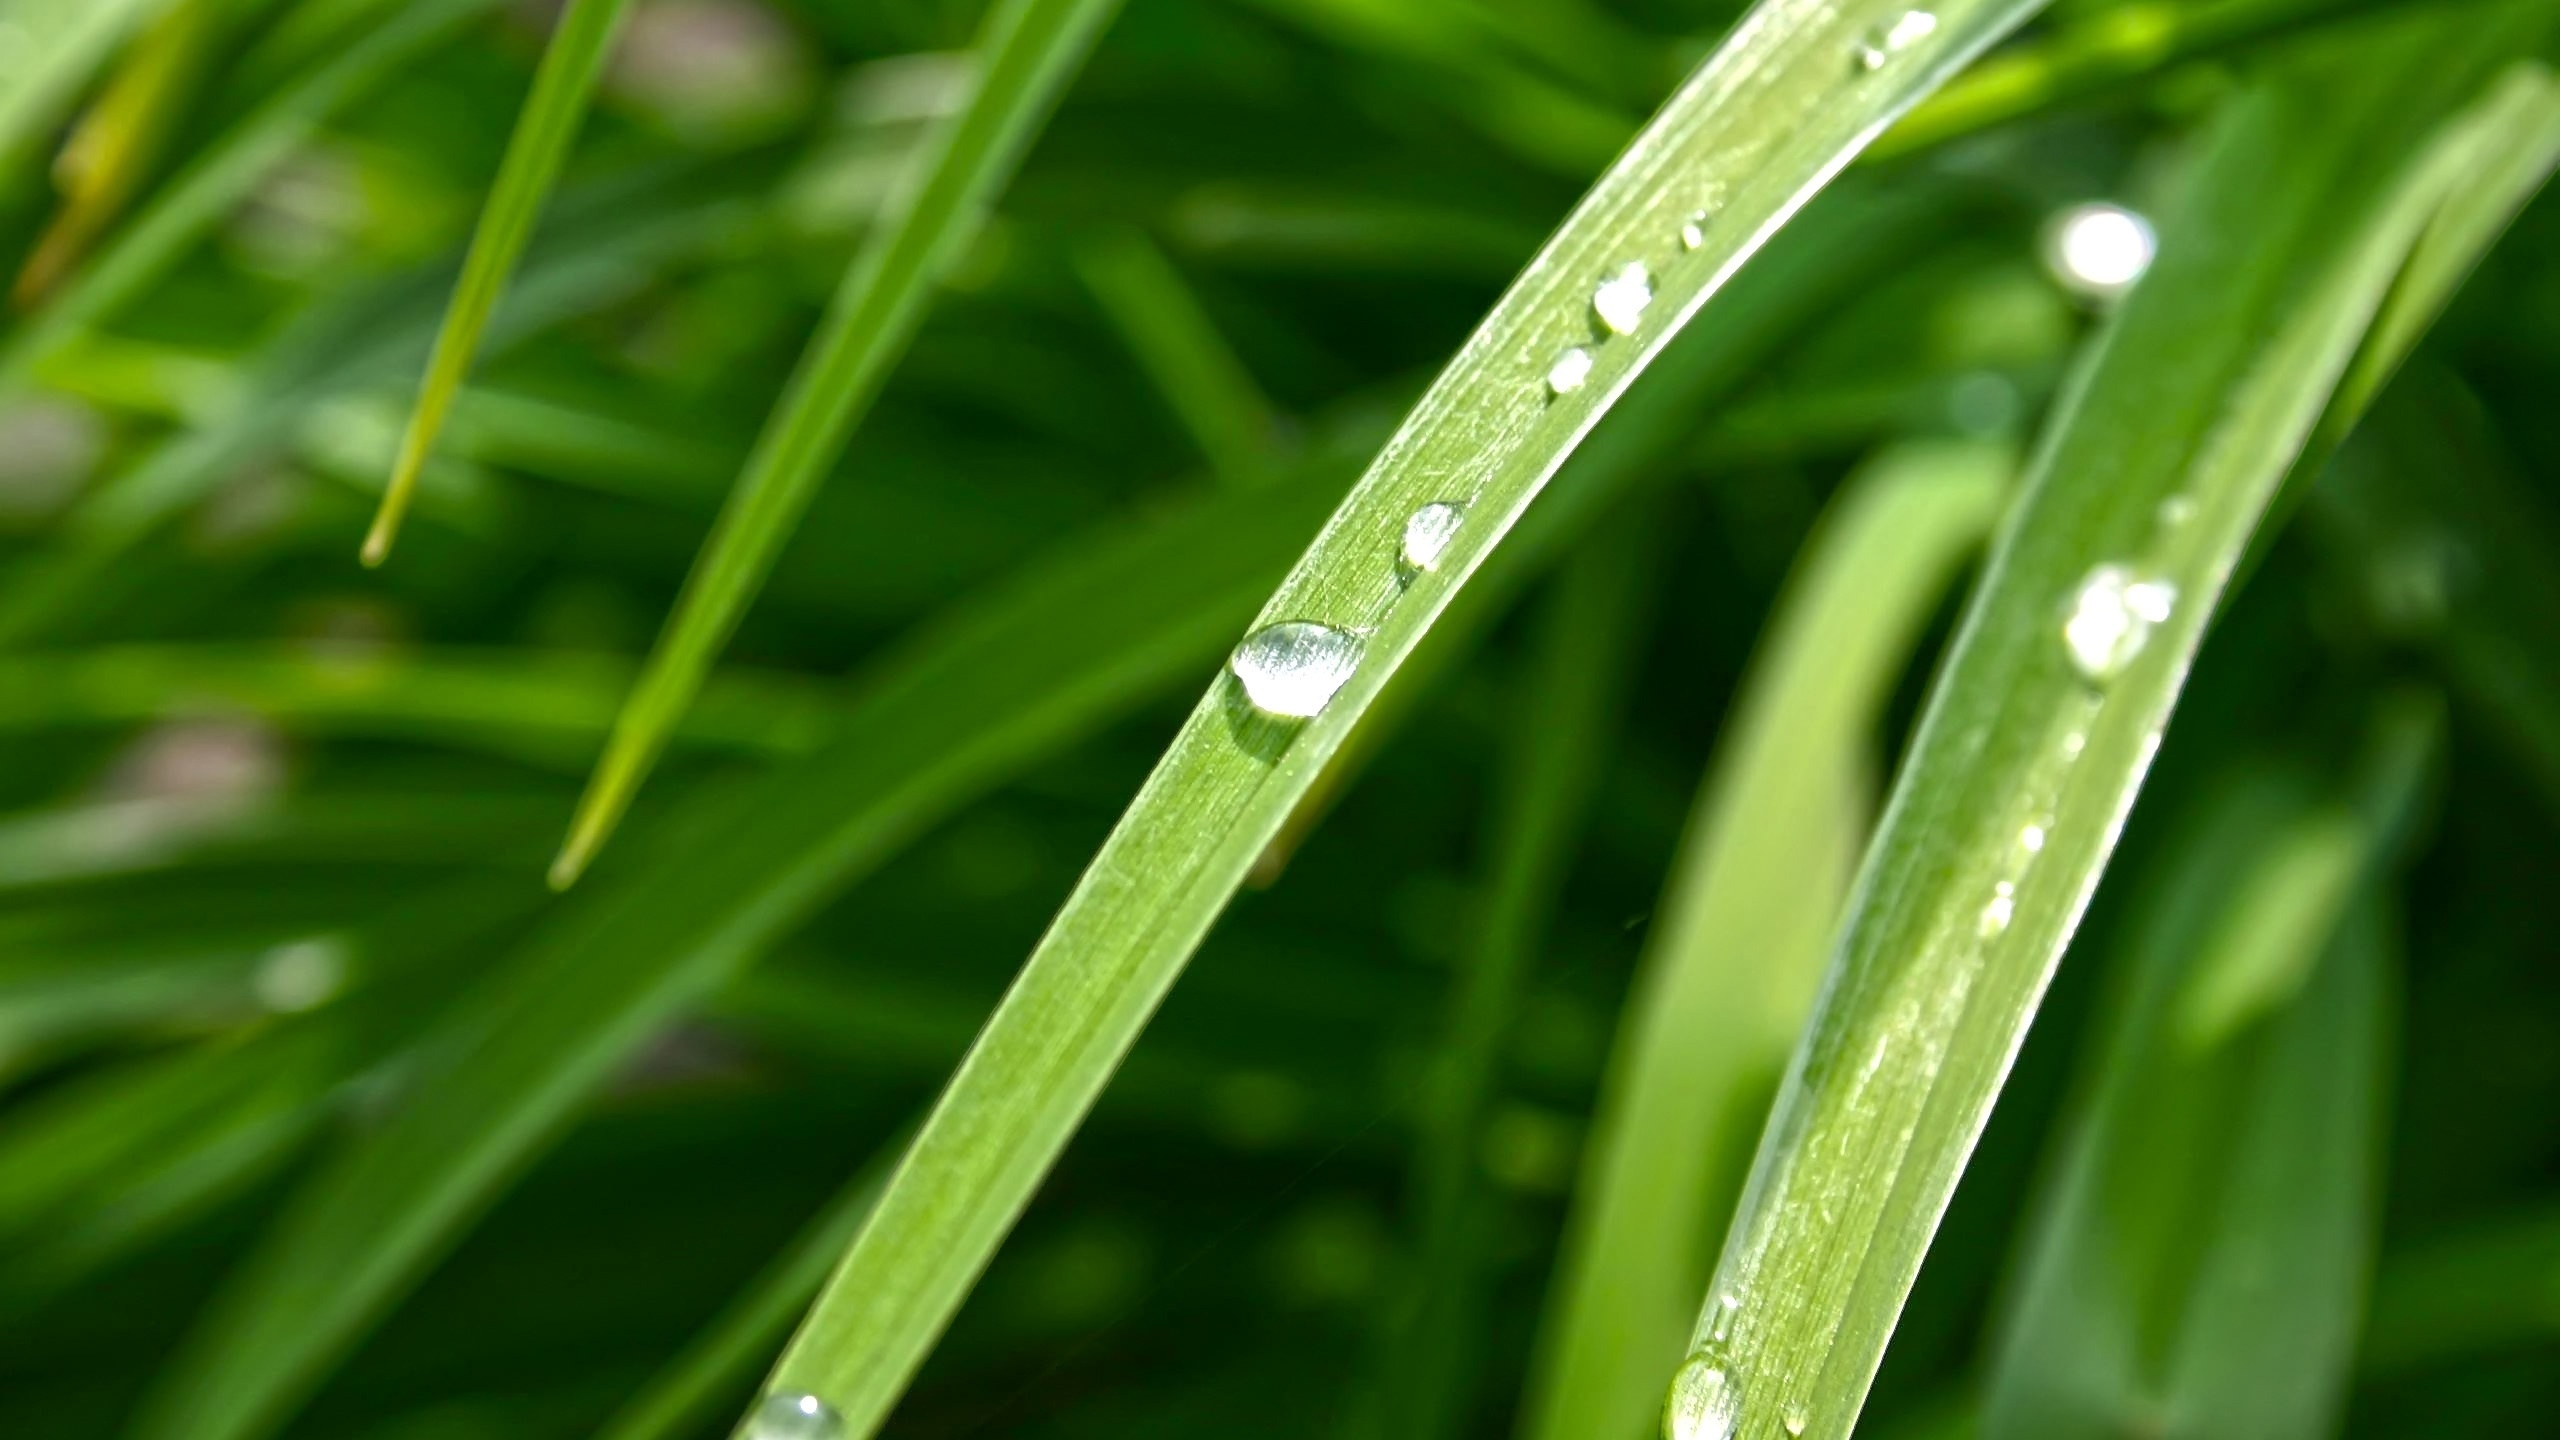 Dew Drop for 2560x1440 HDTV resolution